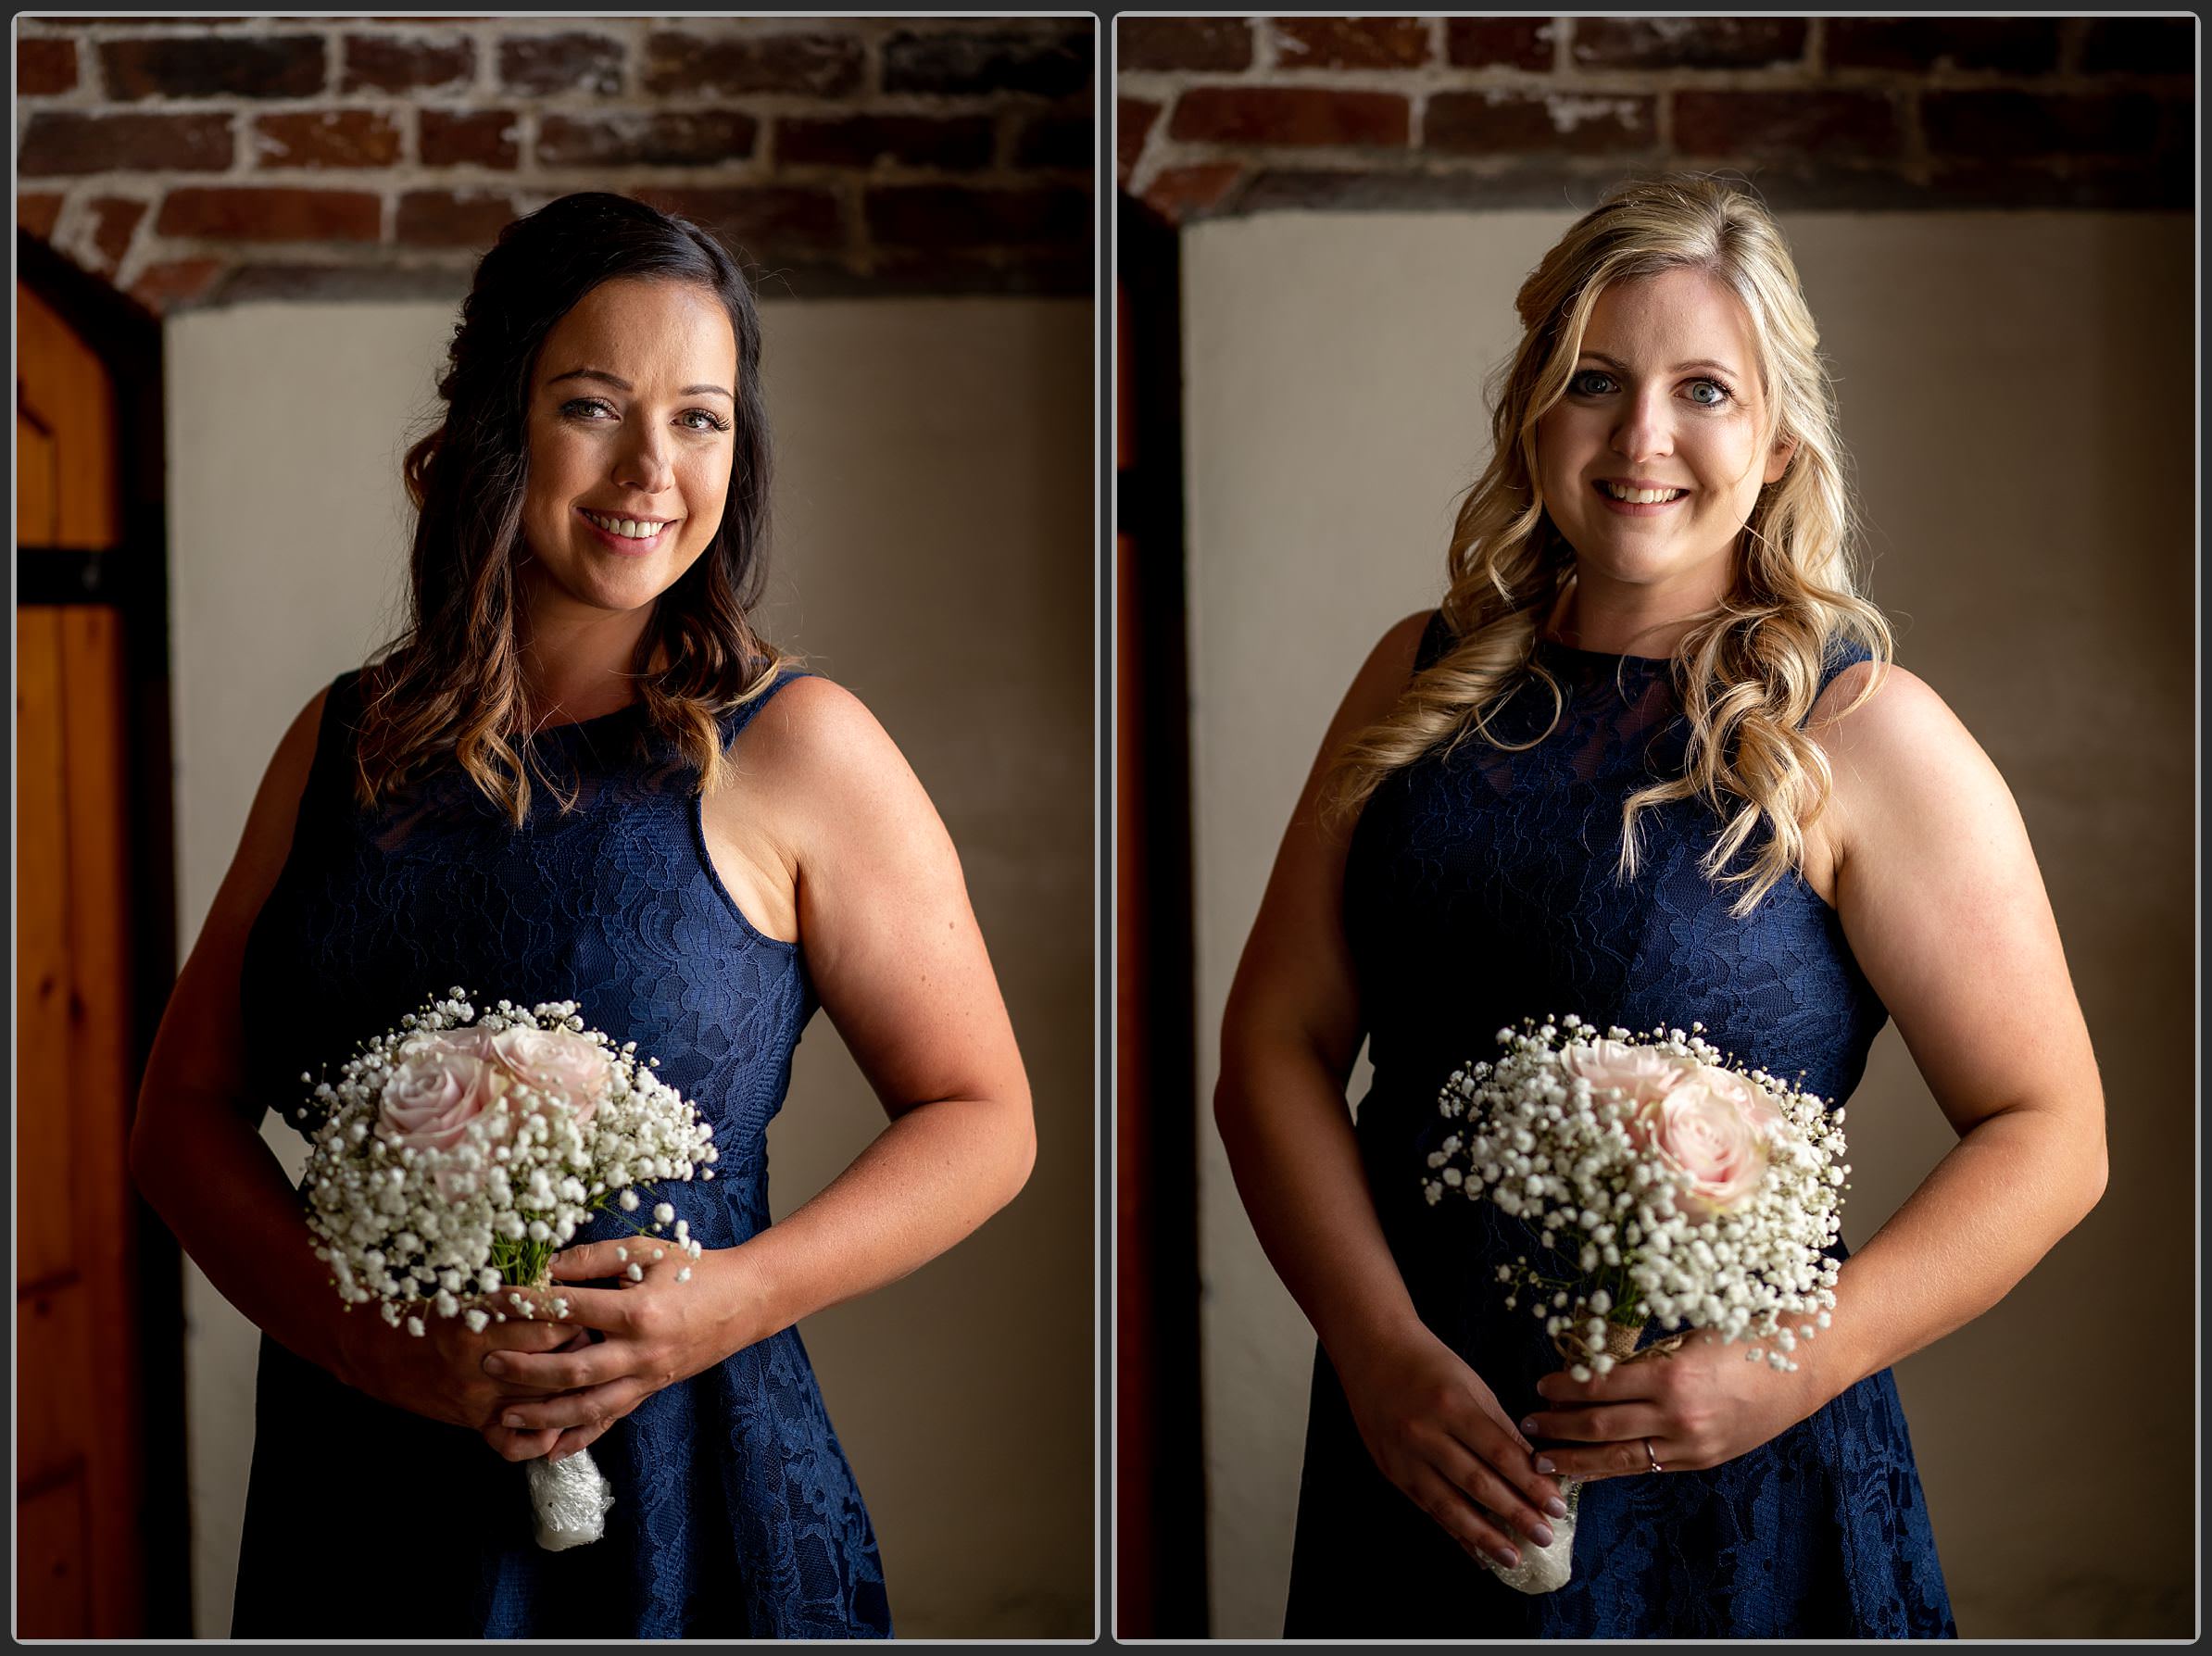 Portraits of the bridesmaids